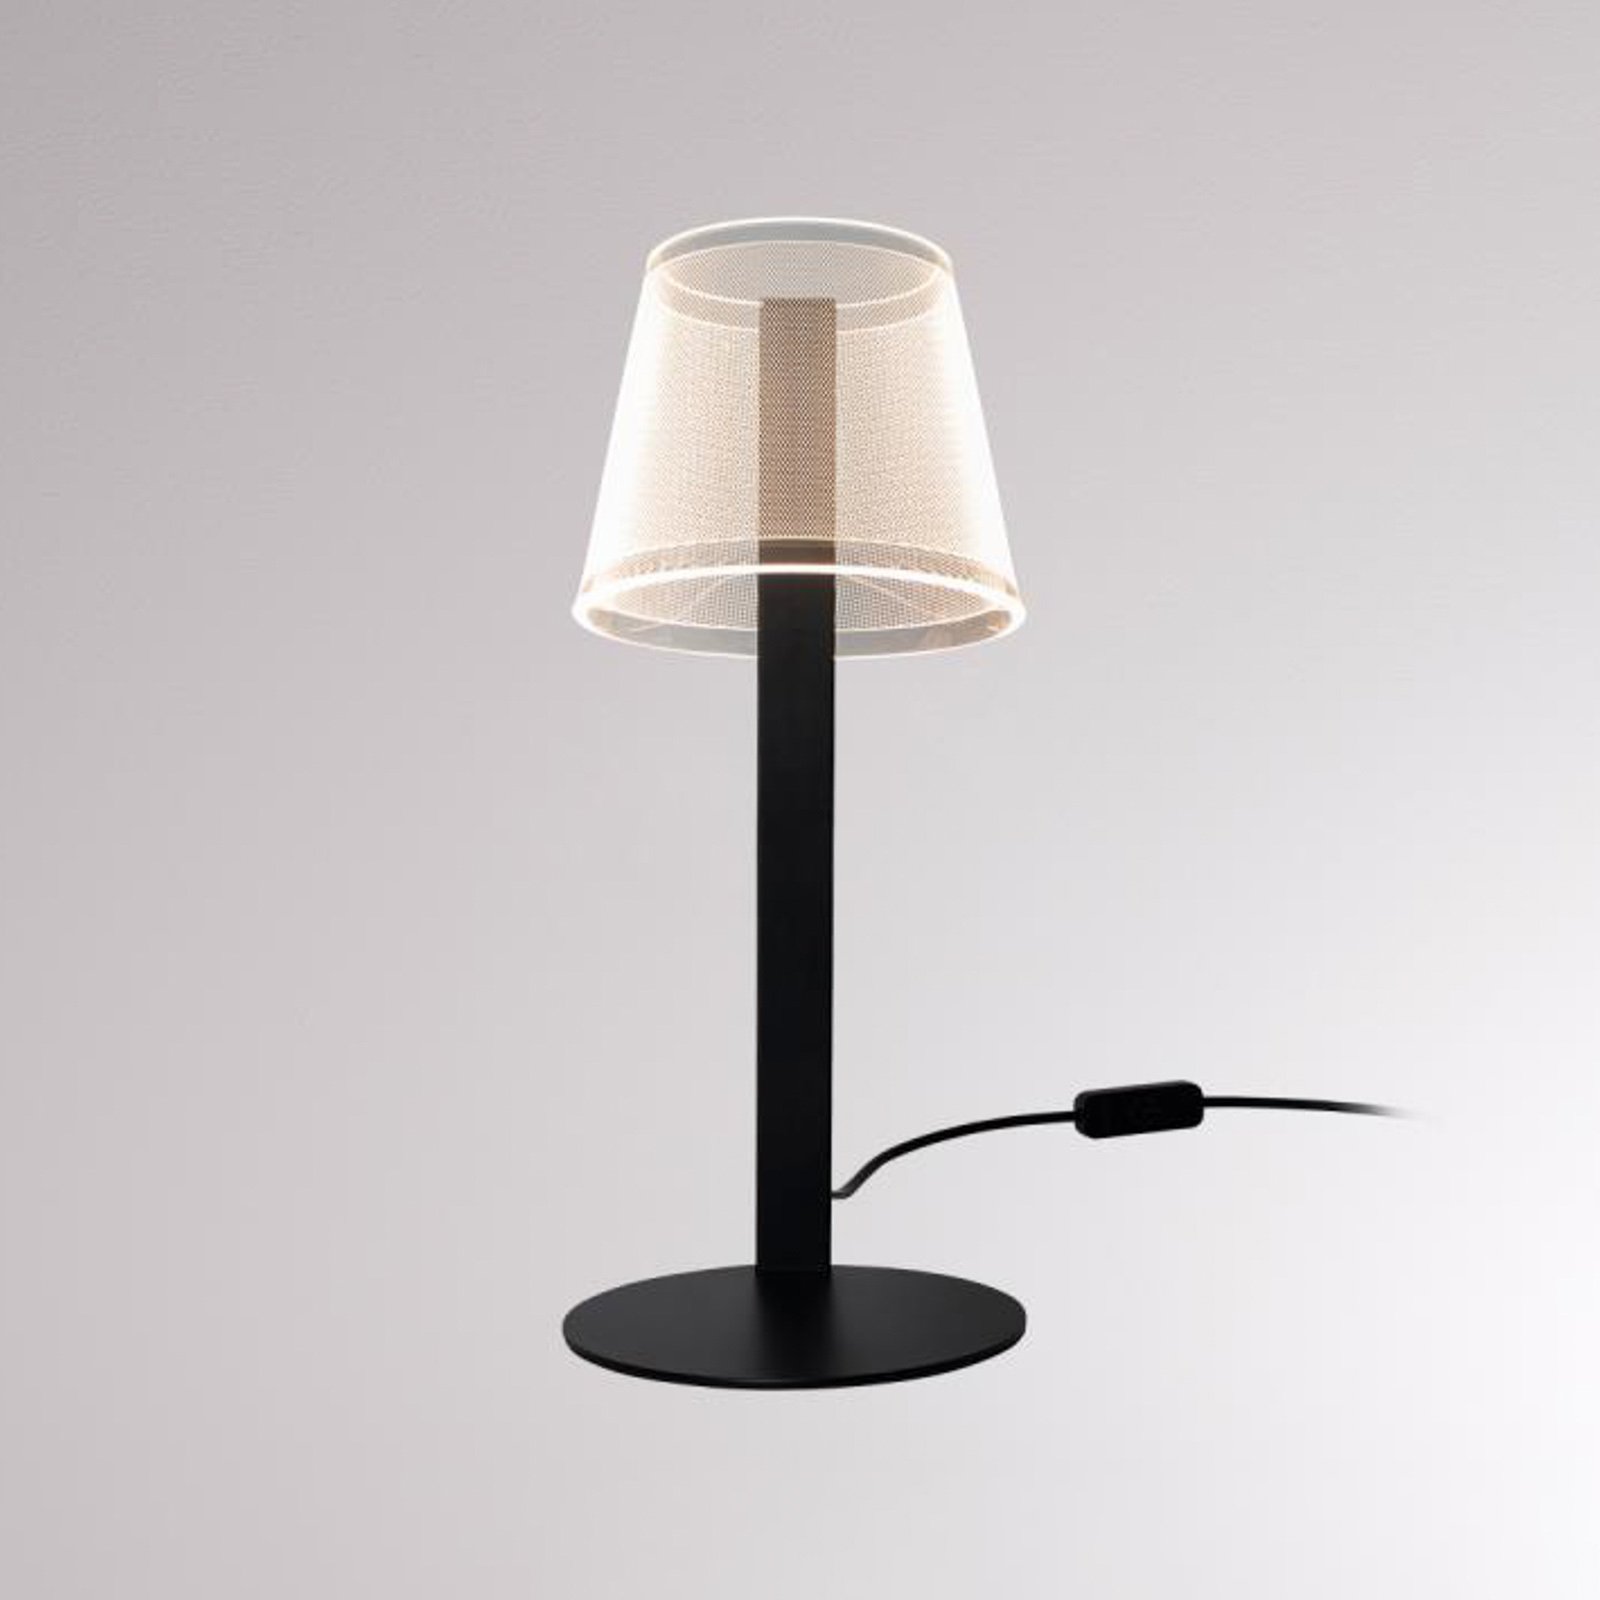 Teo LED table lamp with dimmer